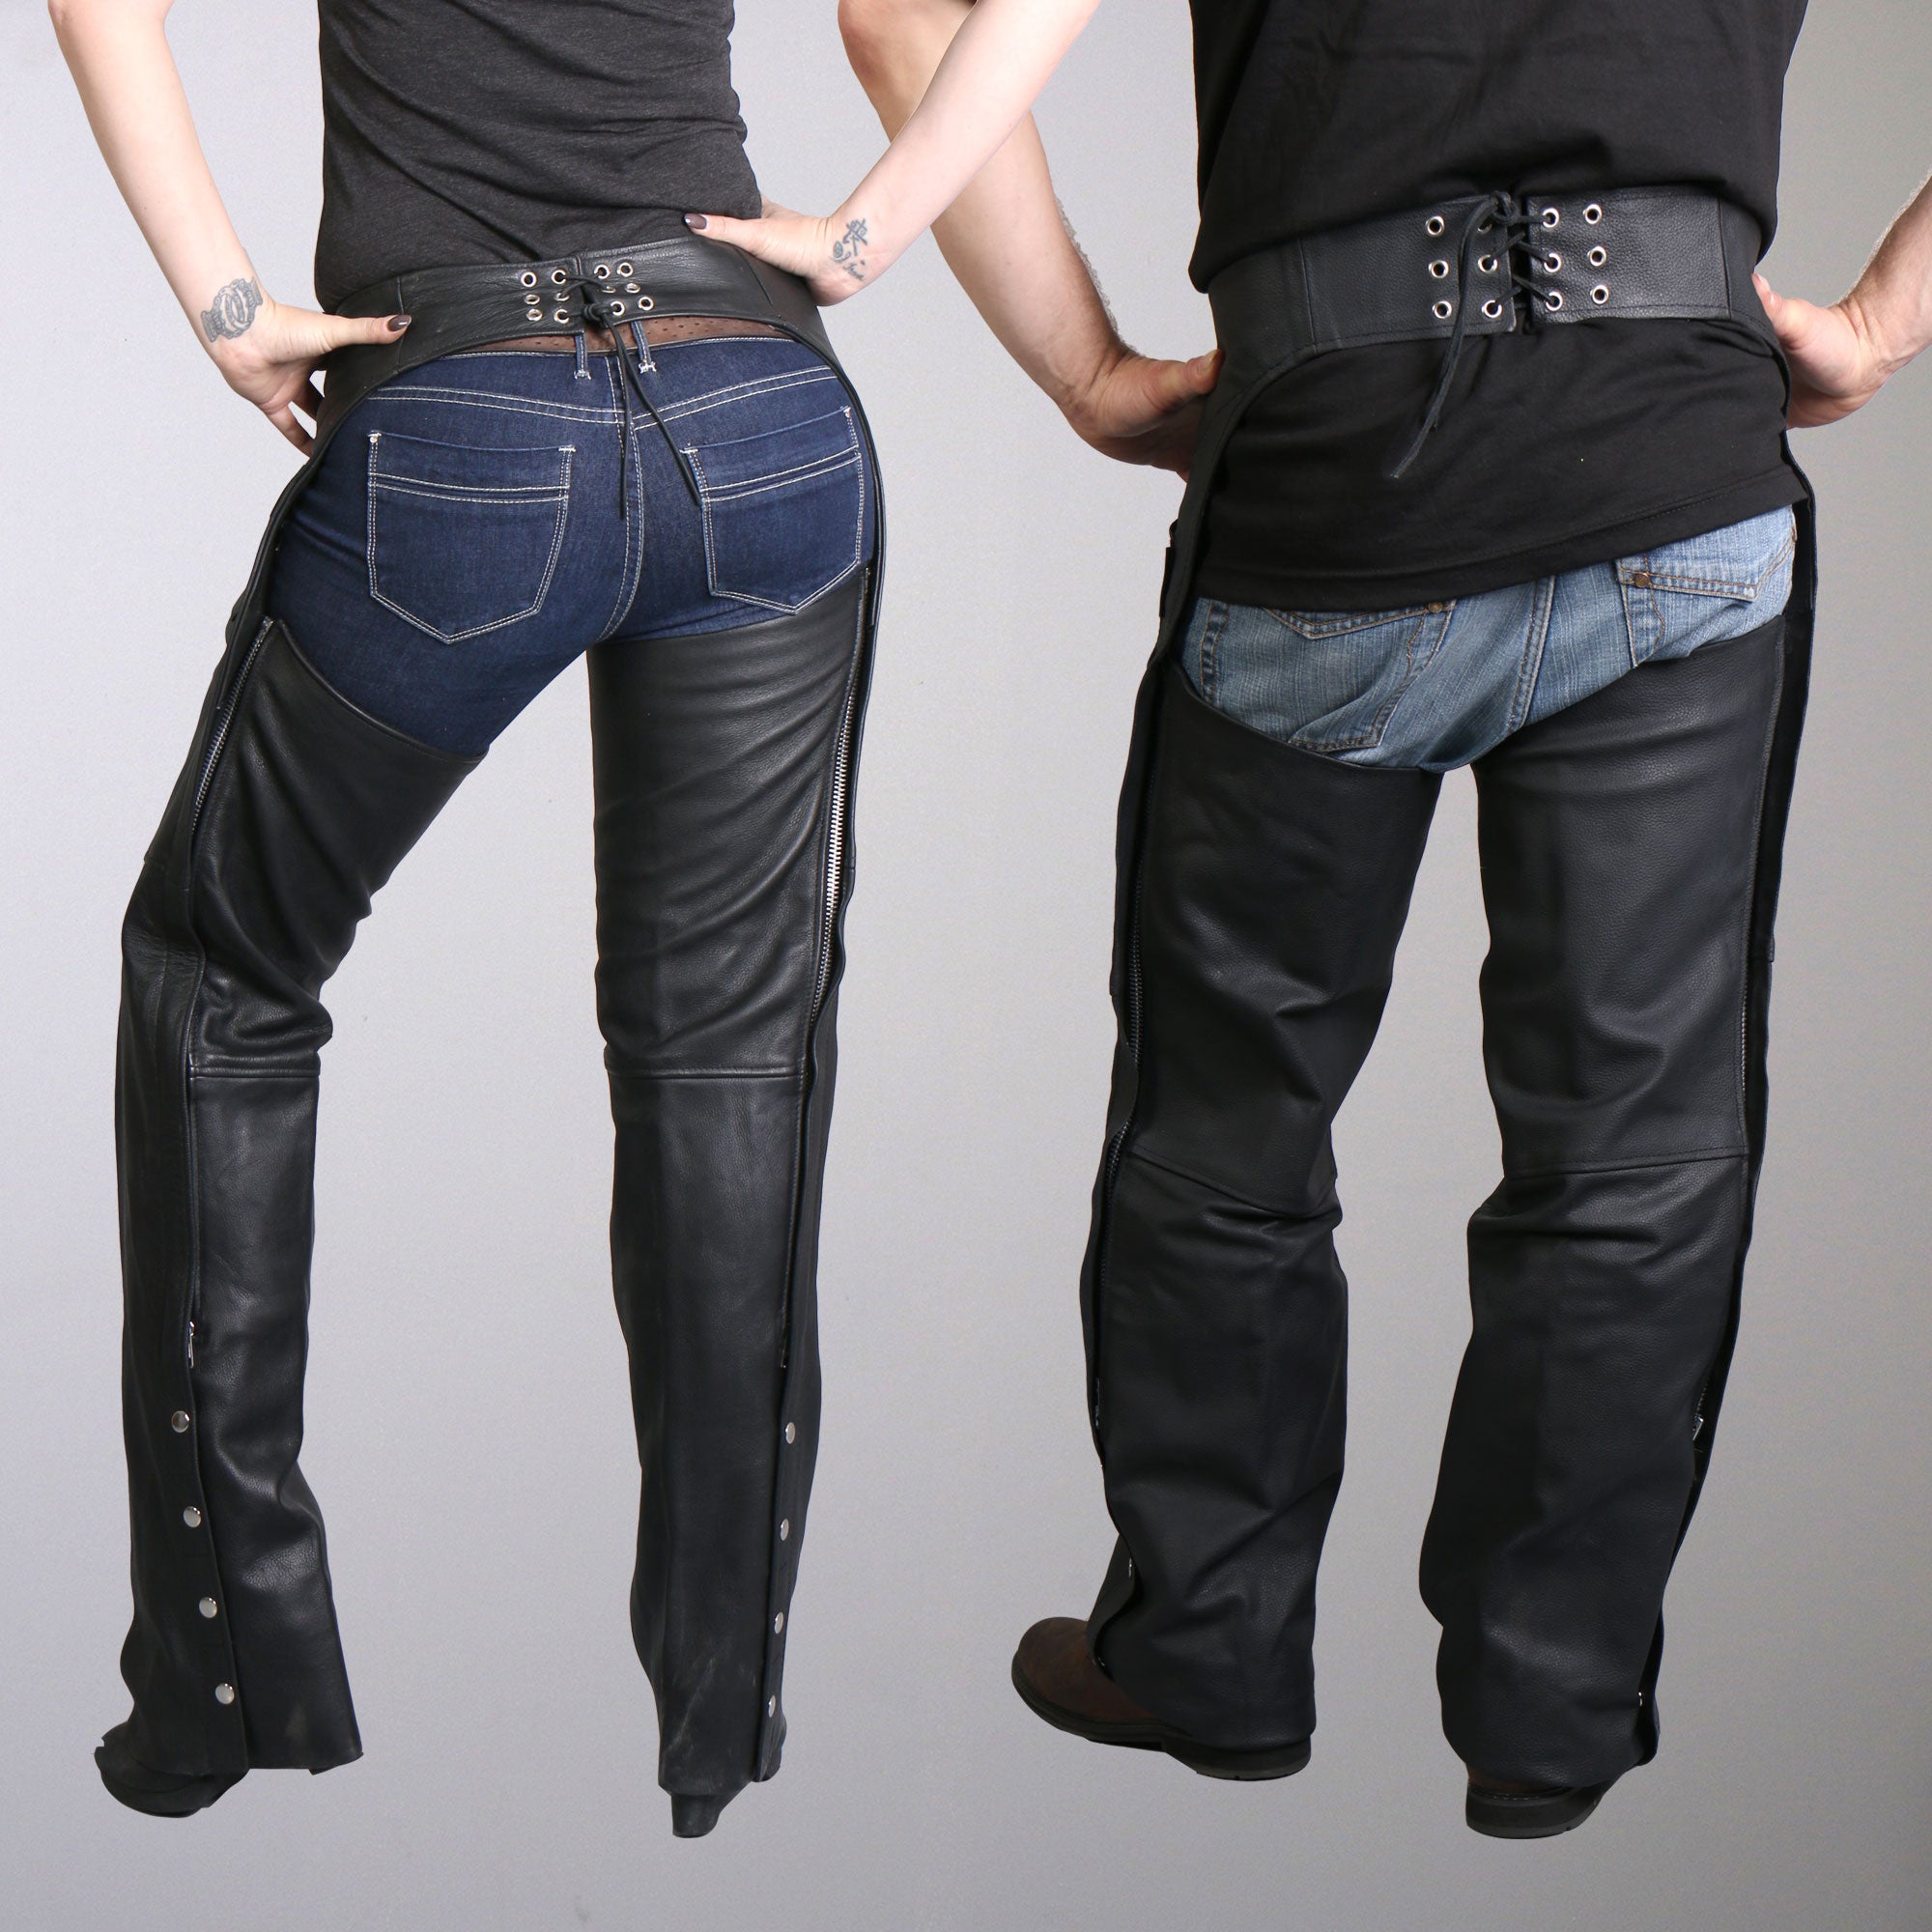 Hot Leathers CHM1001 Best Selling Black Fully Lined Unisex motorcycle Leather Biker Chaps